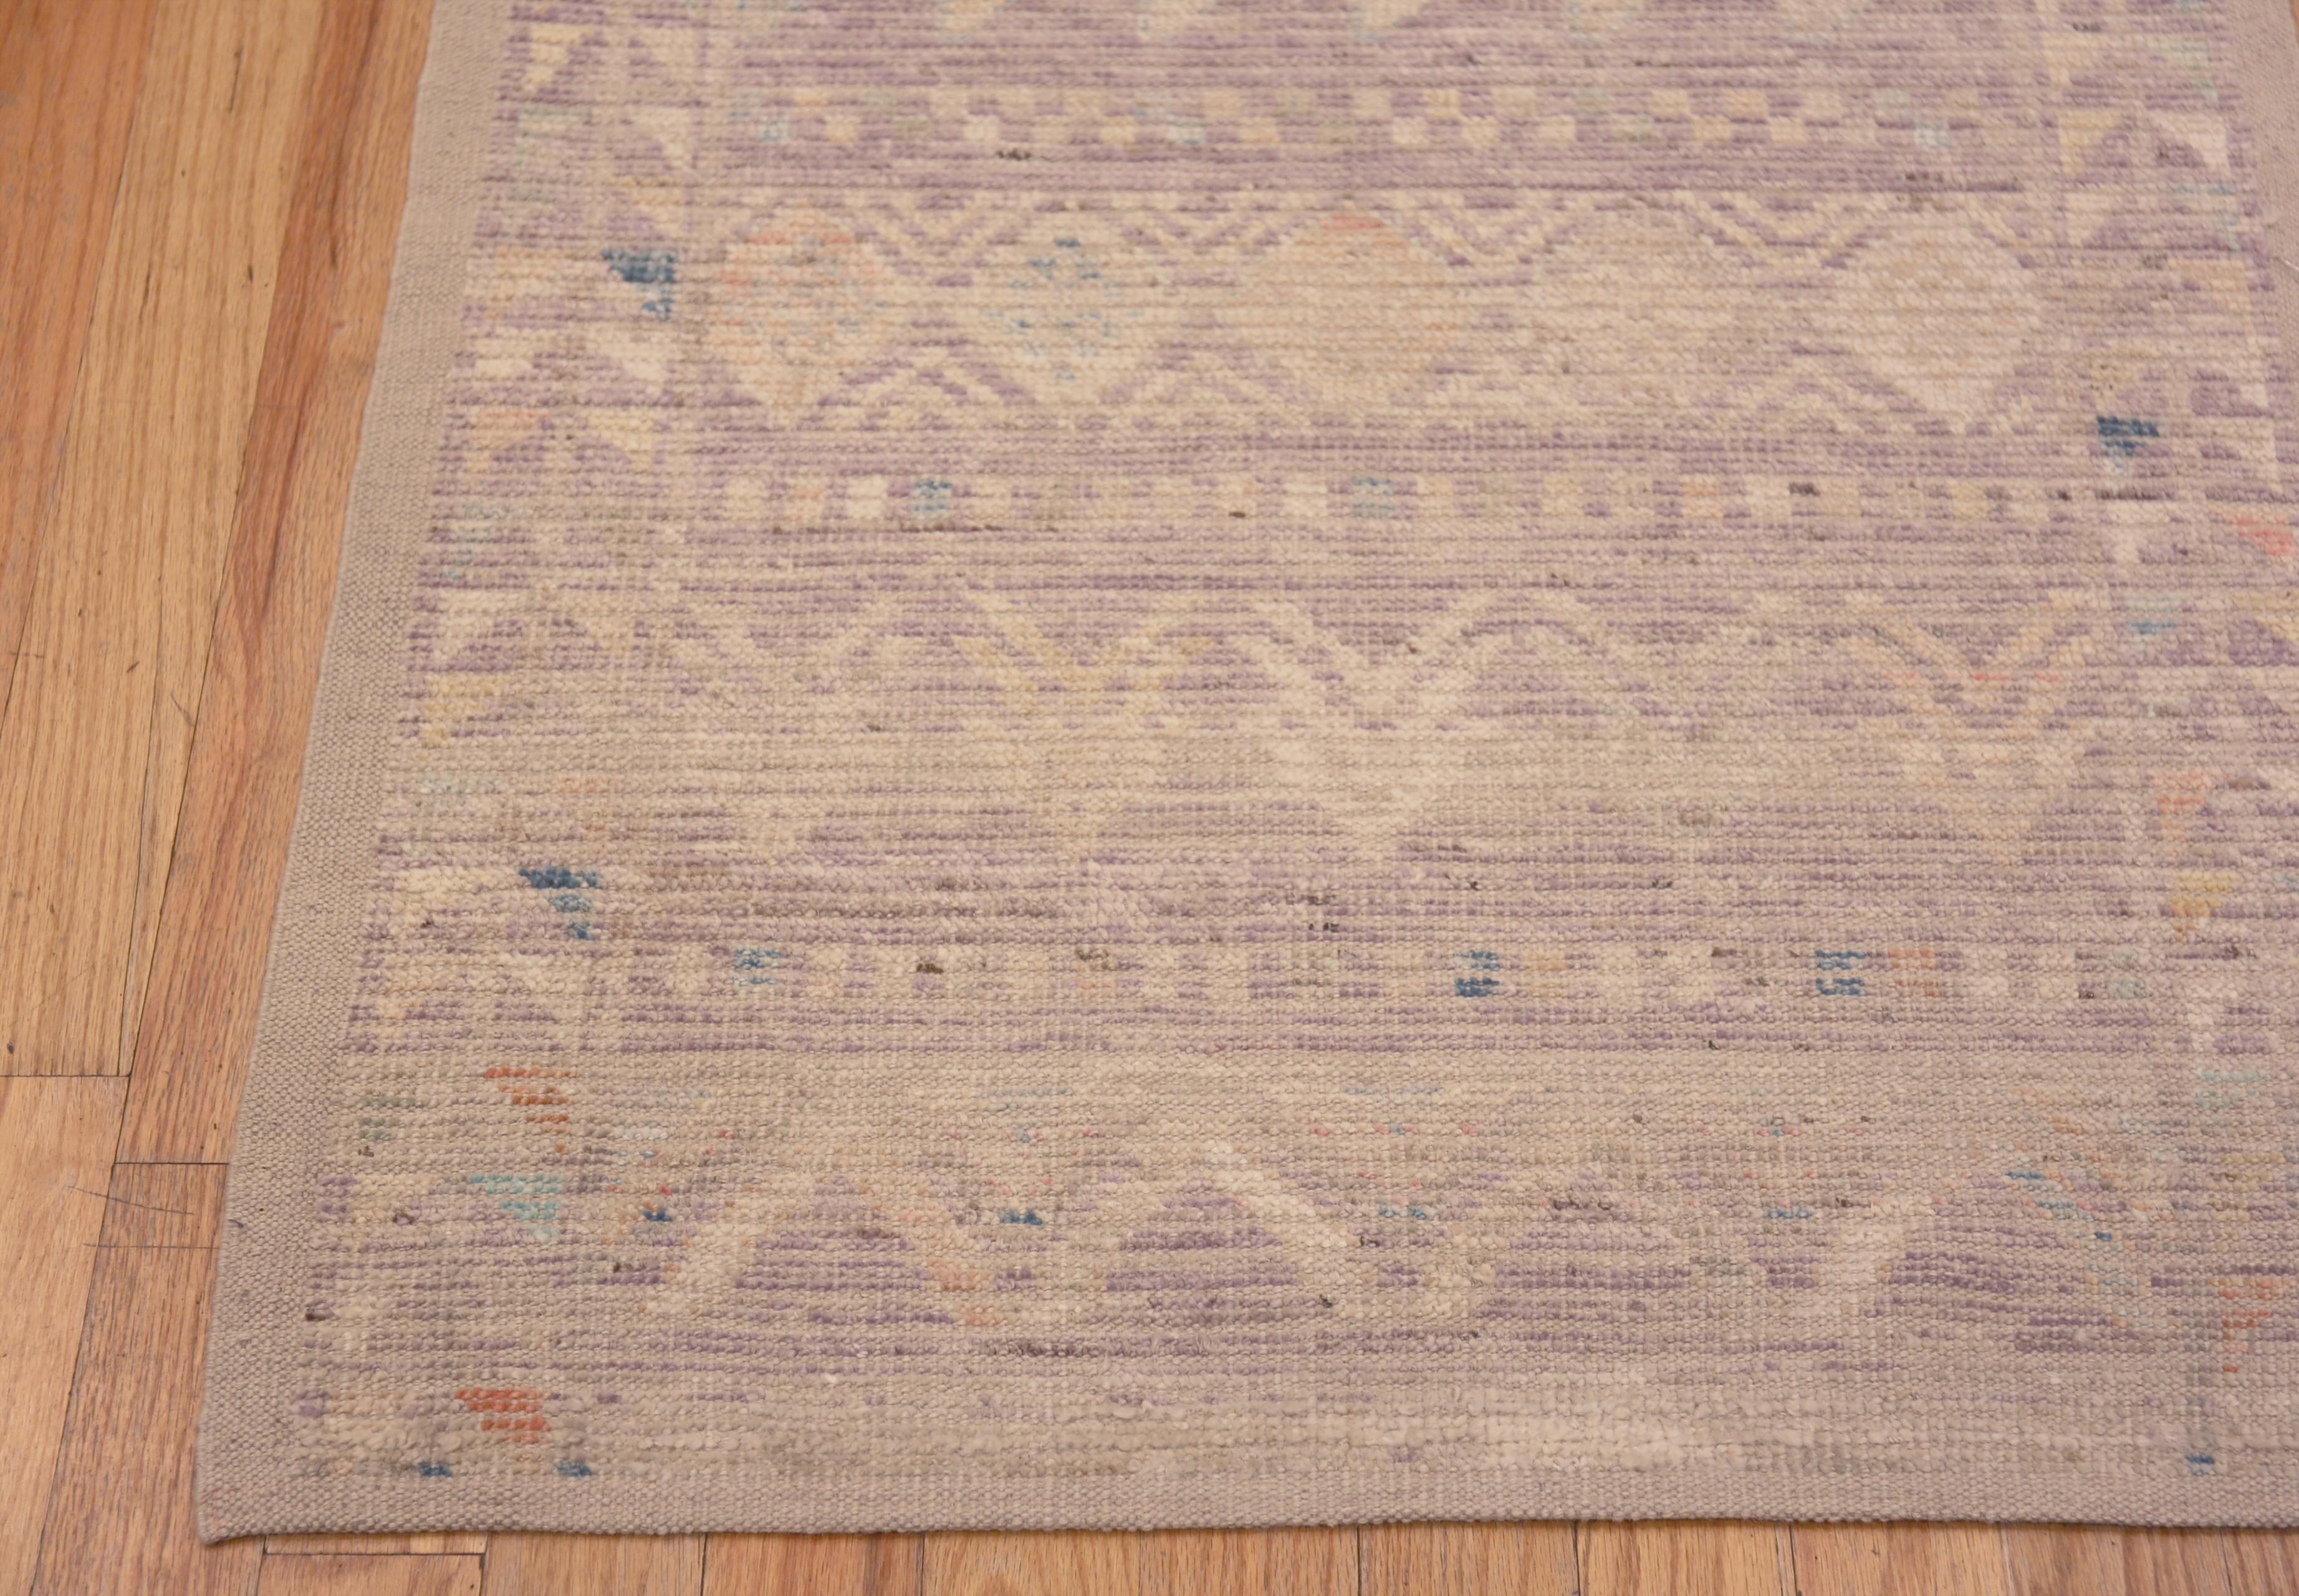 Hand-Knotted Nazmiyal Collection Tribal Geometric Pastel Modern Runner Rug 3' x 13'2